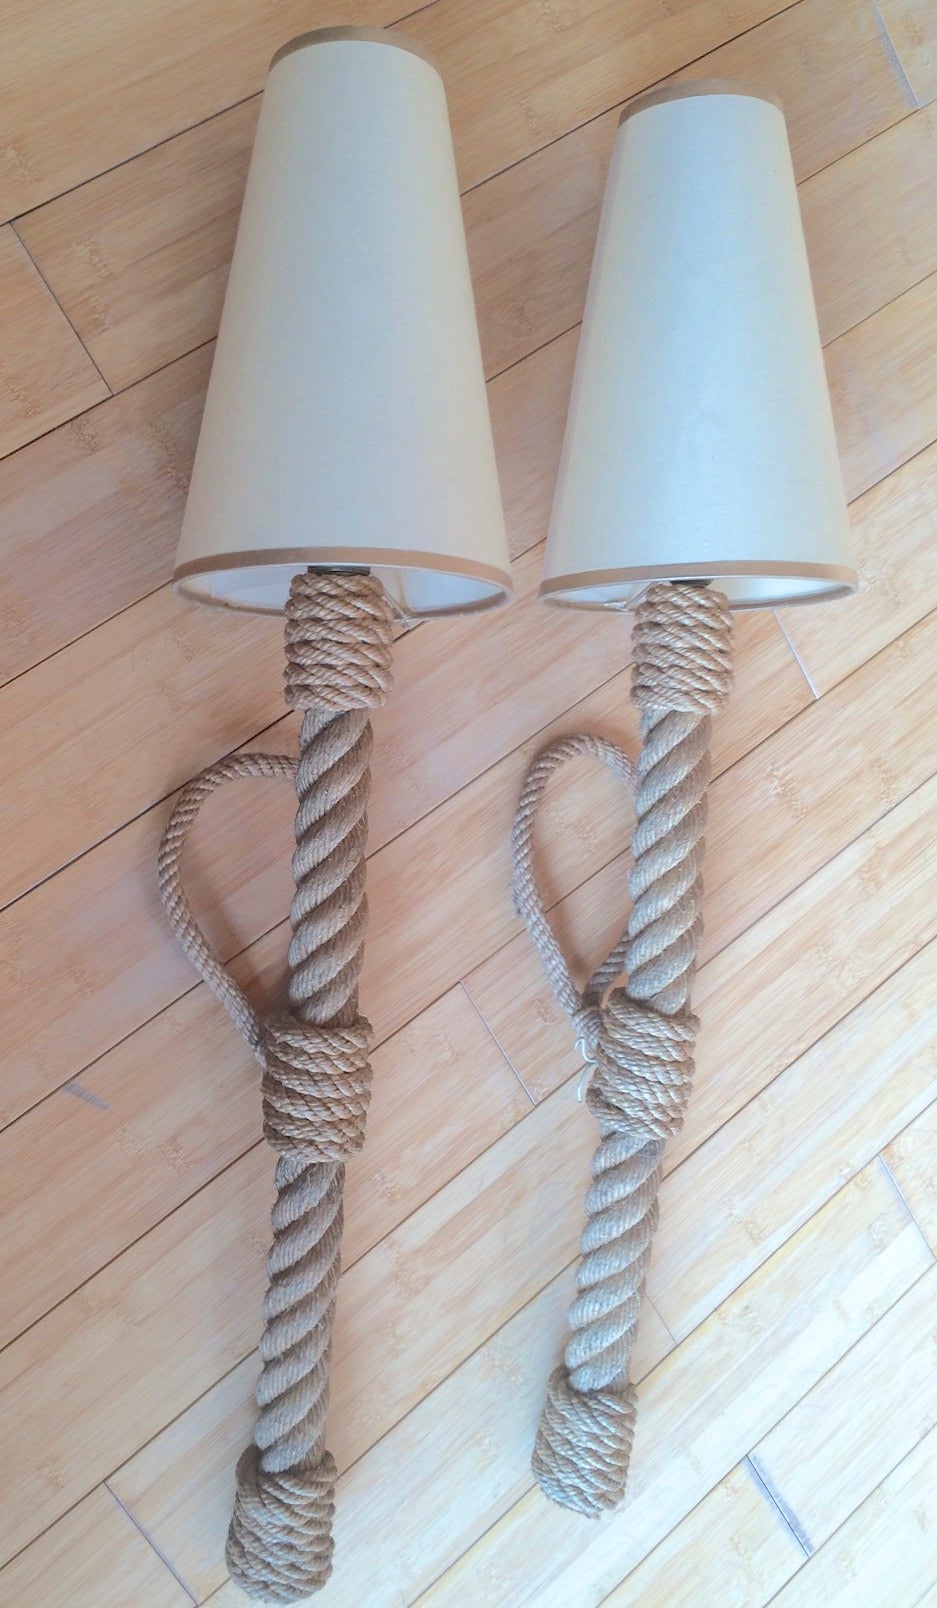 Riviera Audoux Minet pair of awesome rope torches.